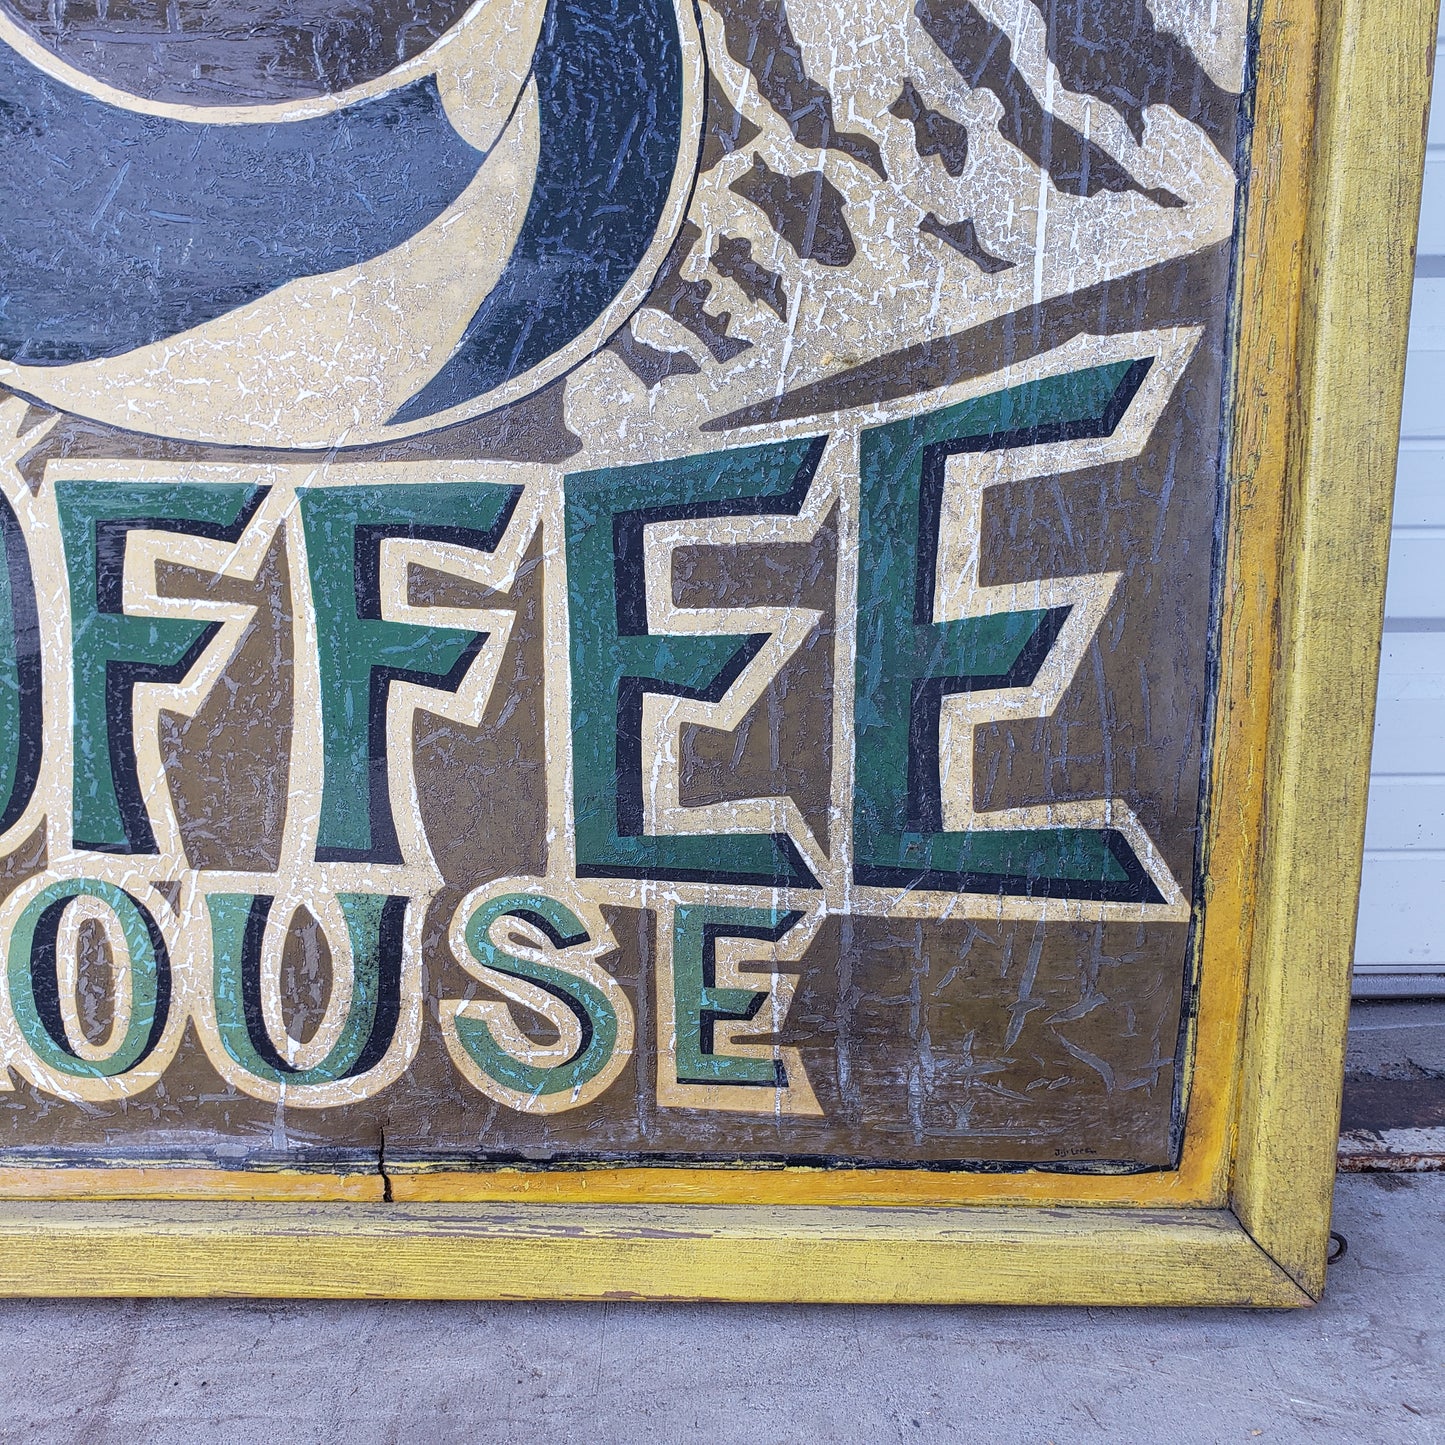 Uptown Coffee House Double Sided Sign